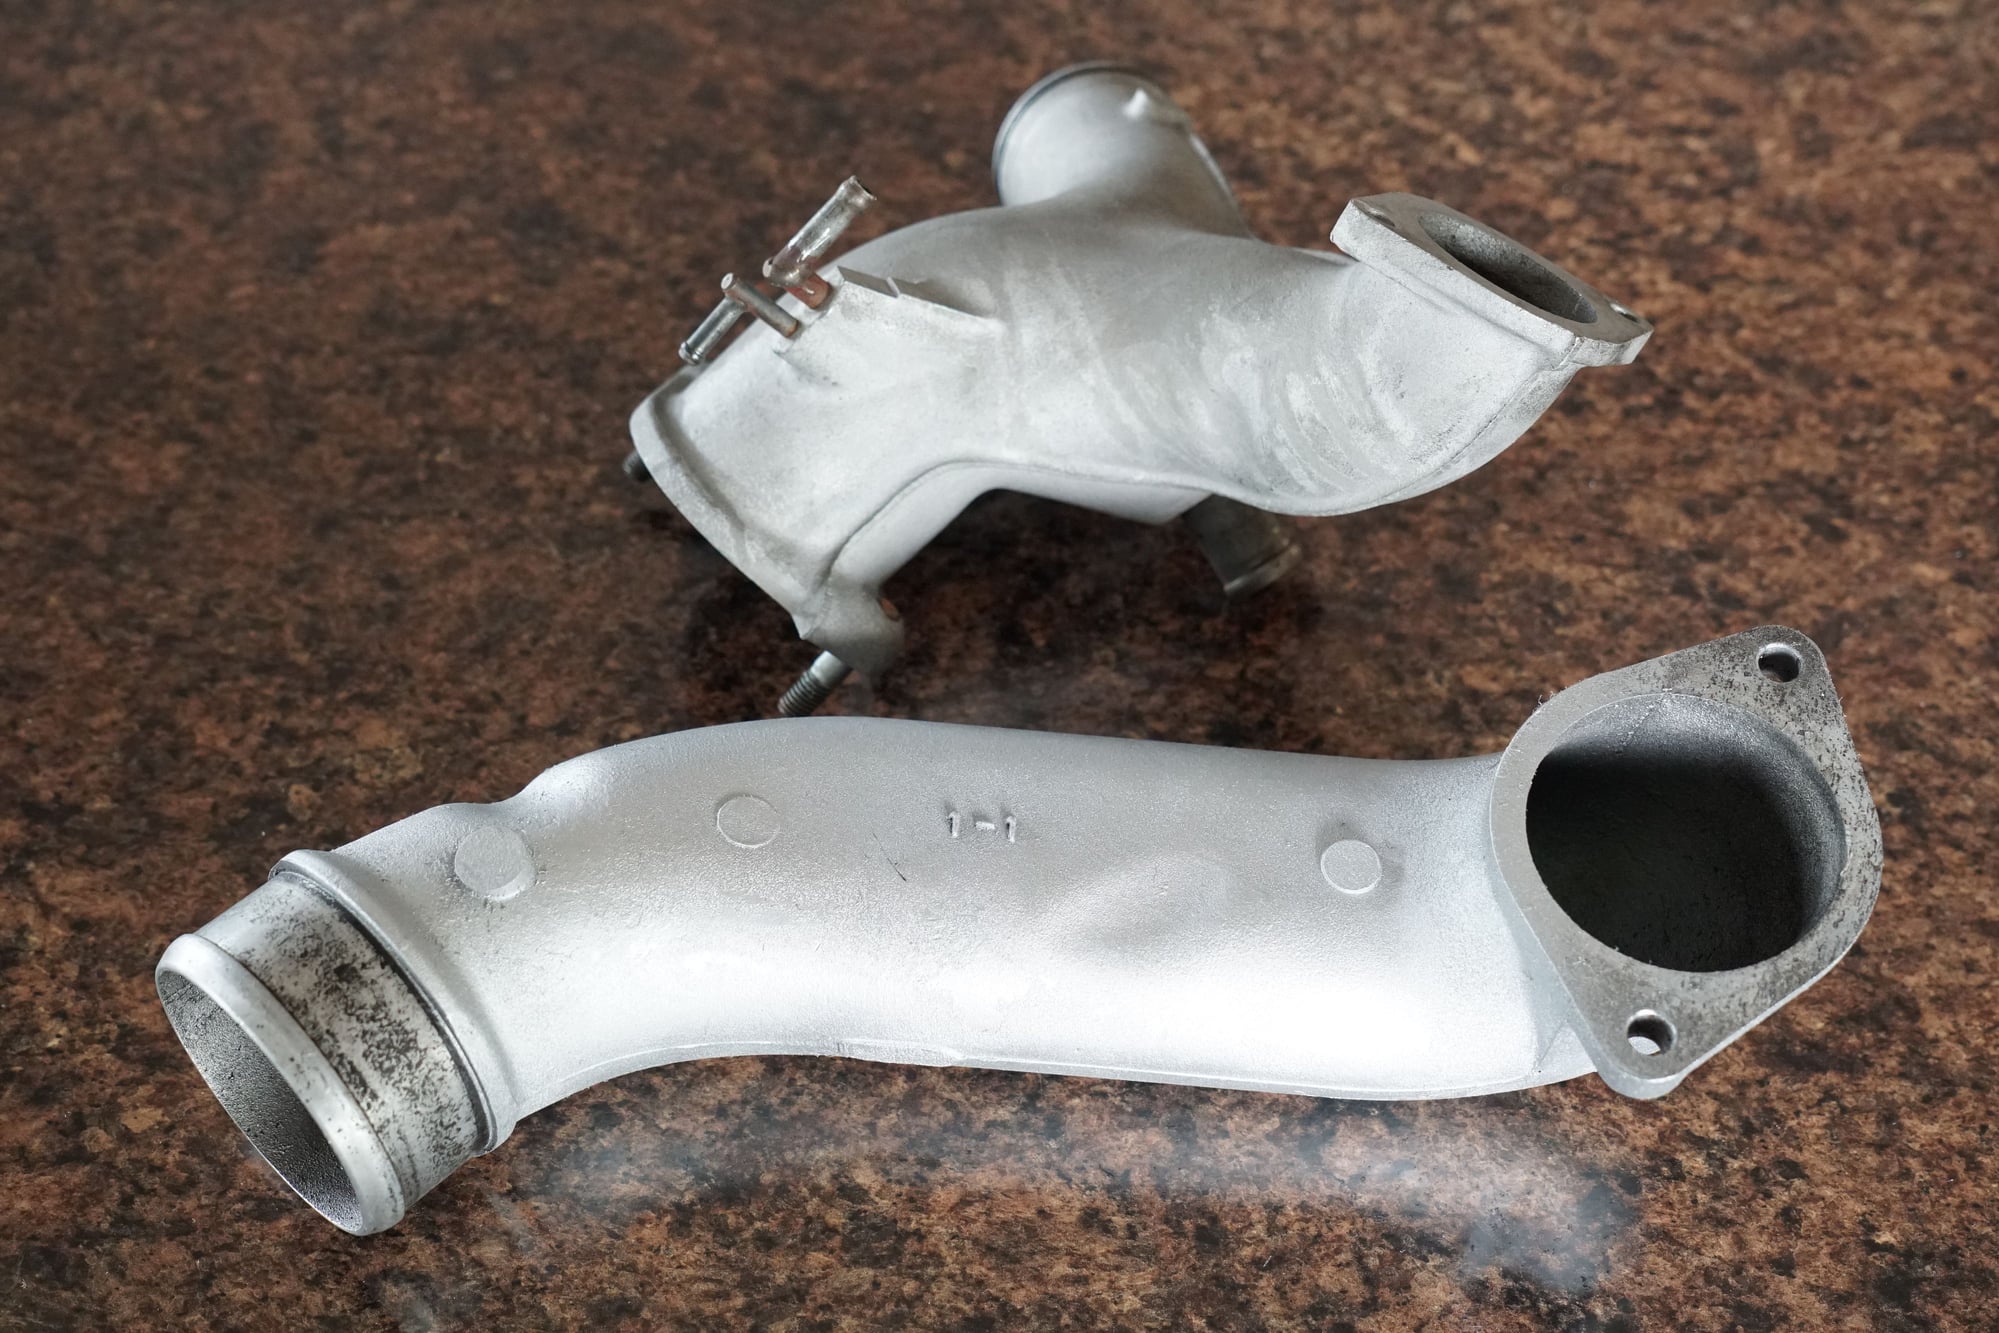 Engine - Intake/Fuel - Efini Y-Pipe - Used - 1993 to 2002 Mazda RX-7 - Chicago, IL 60605, United States